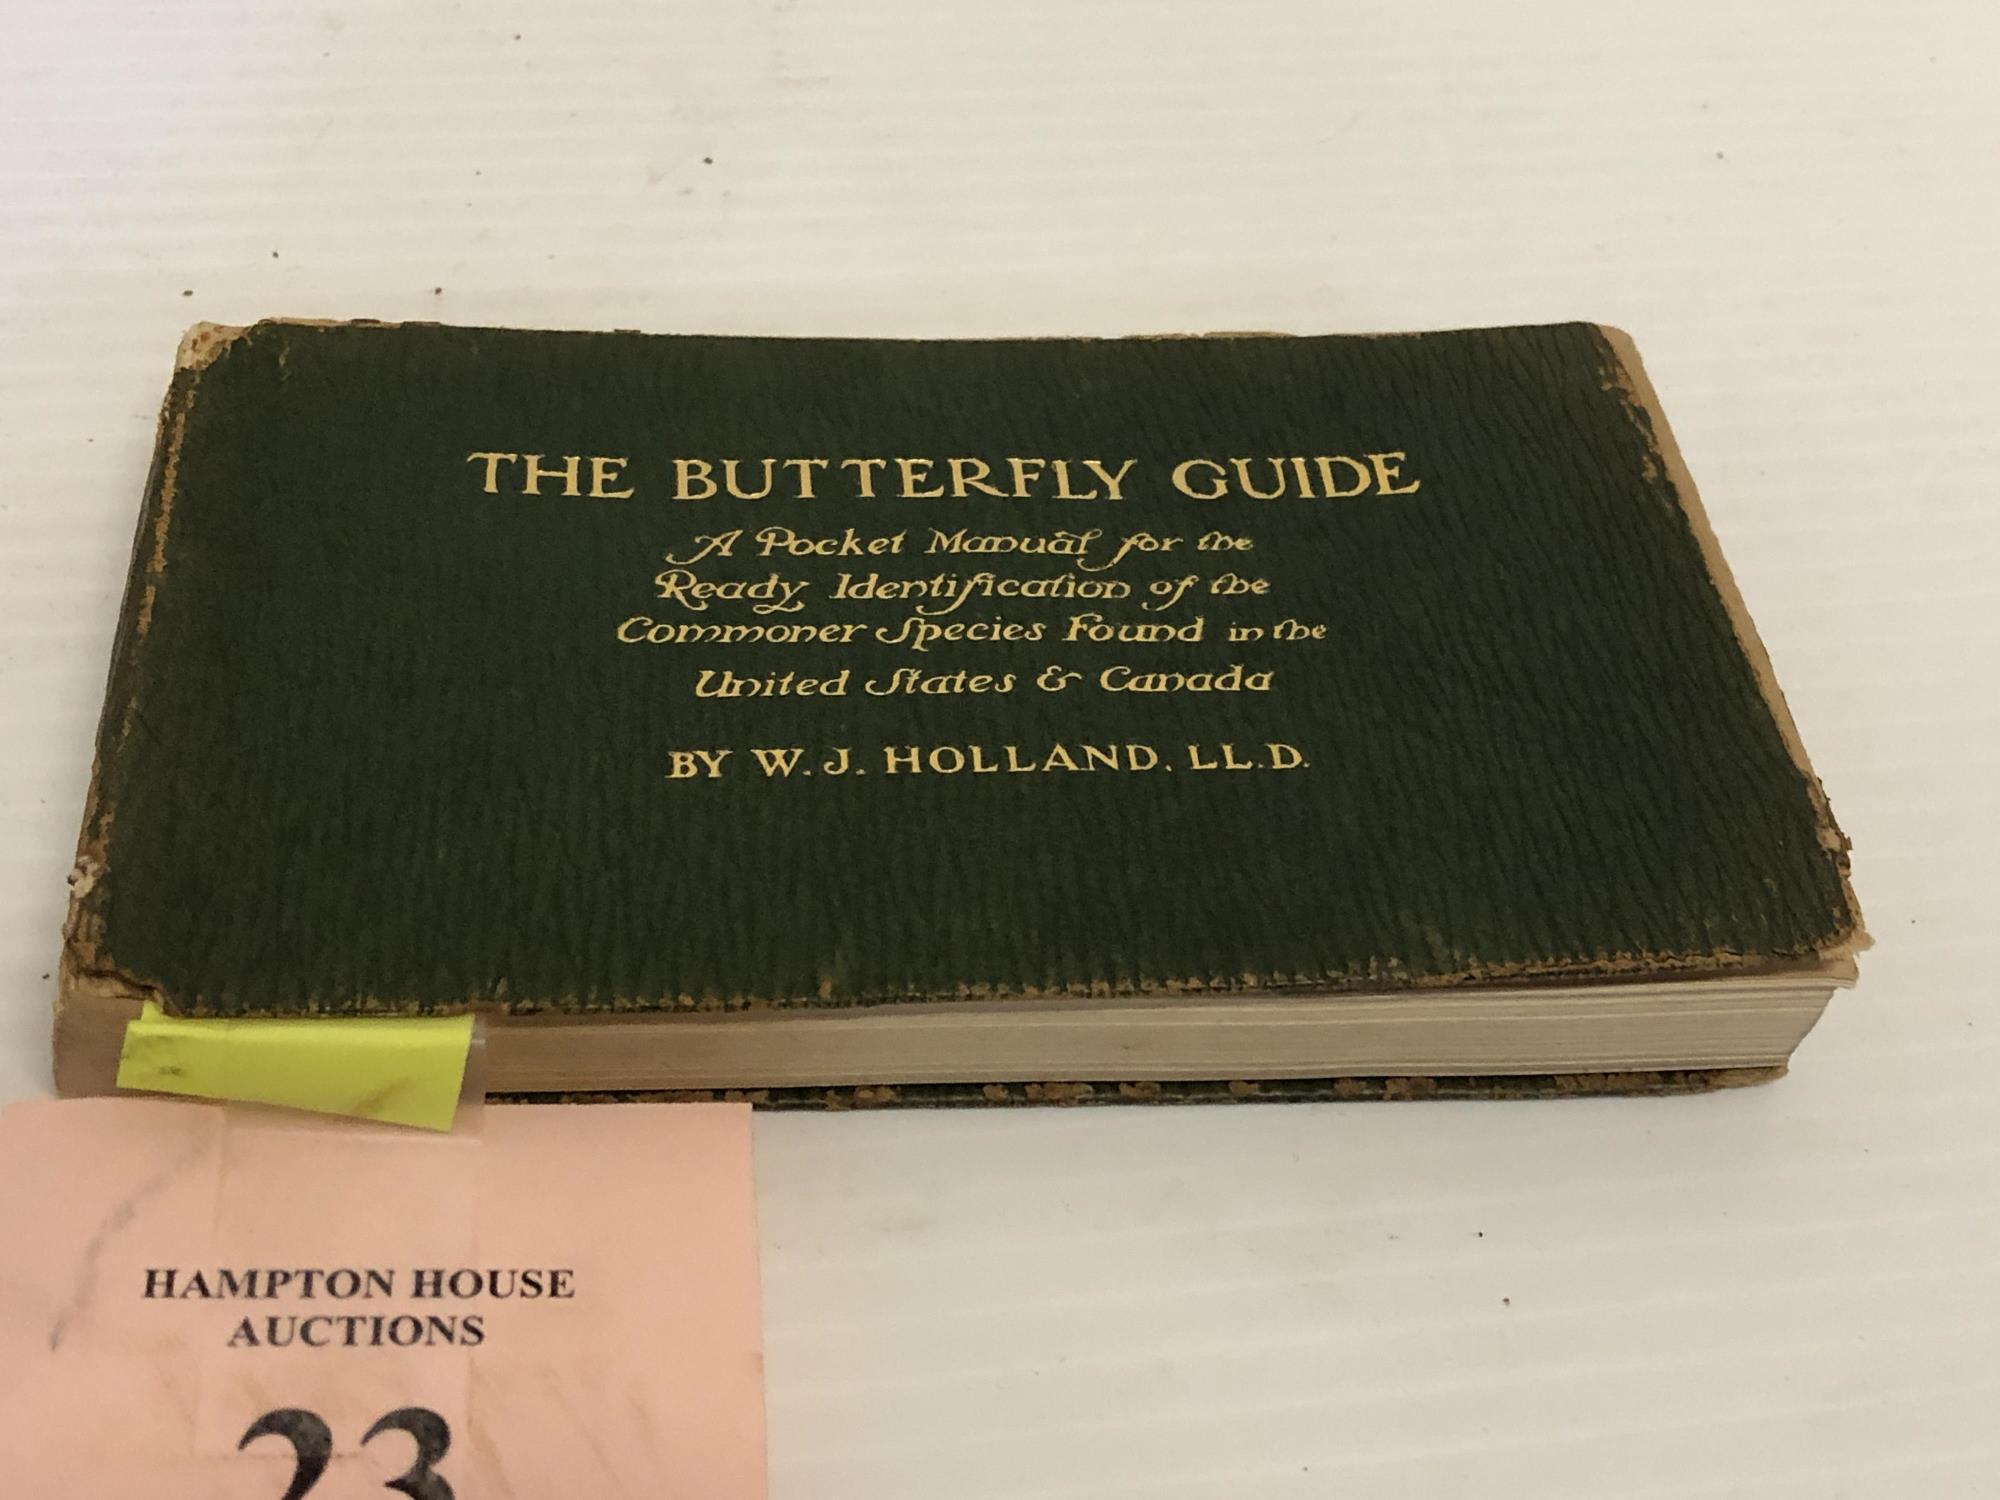 THE BUTTERFLY GUIDE